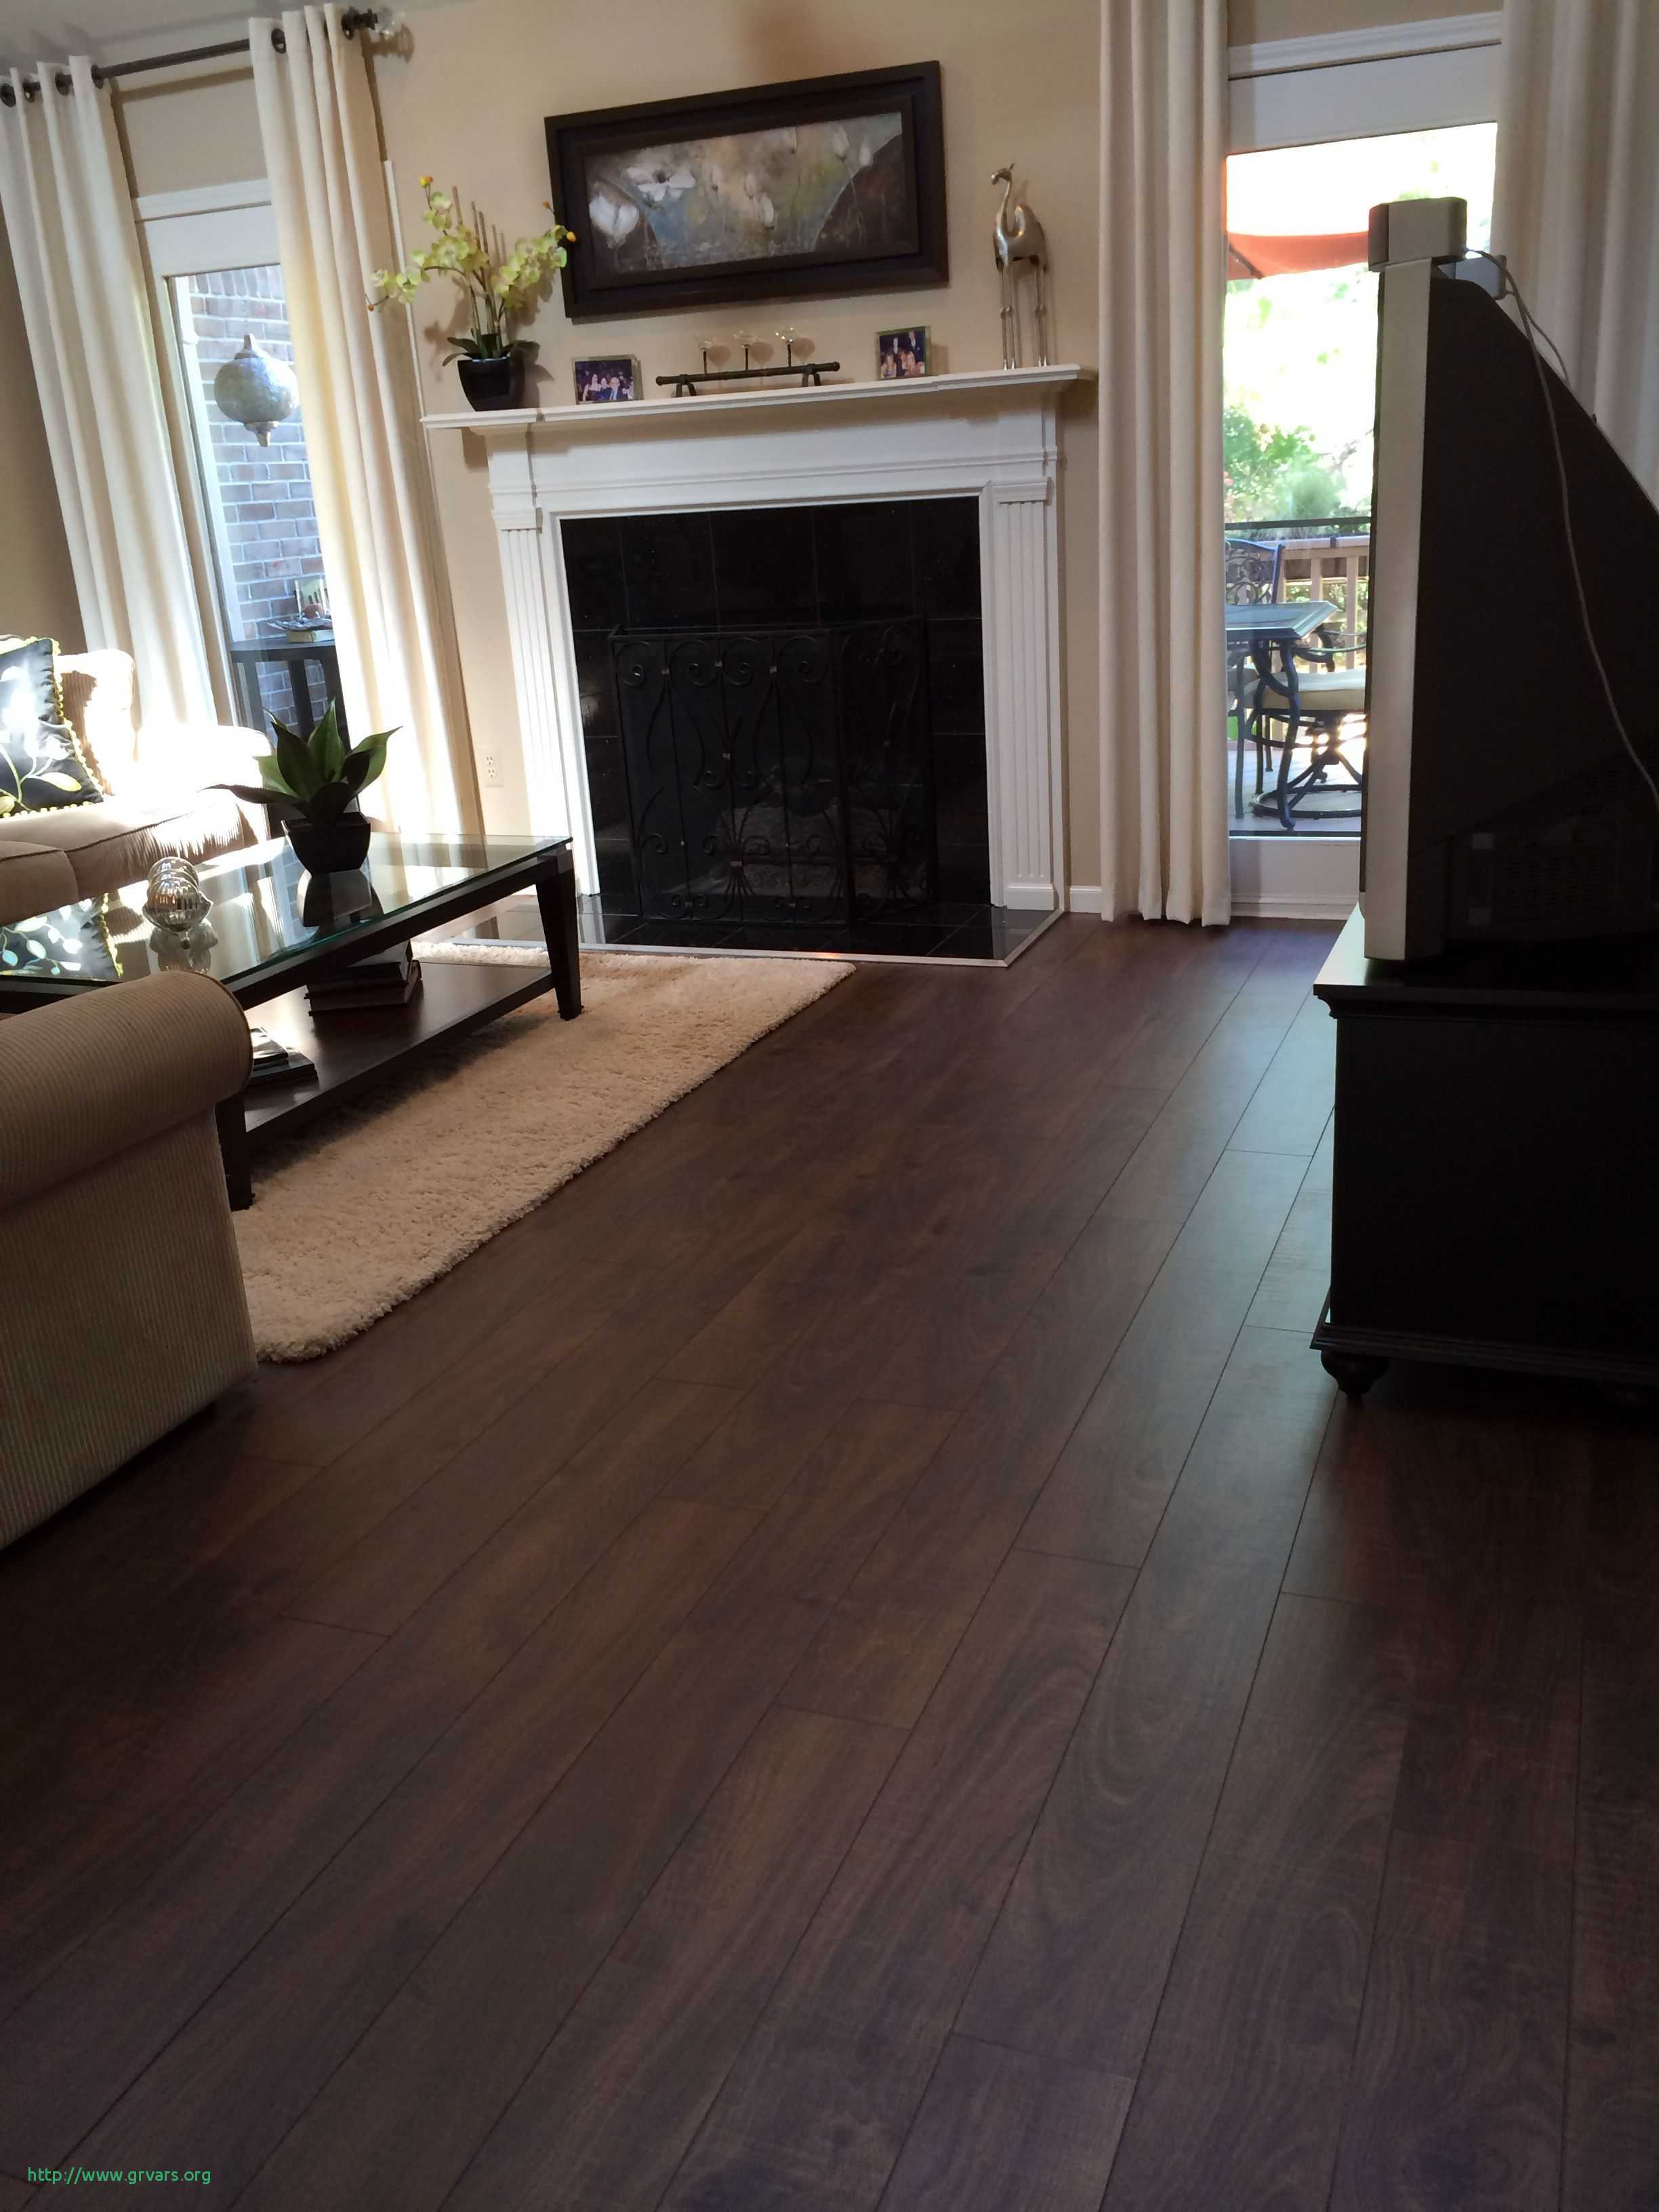 15 Lovable Bruce Hickory Hardwood Flooring Reviews 2024 free download bruce hickory hardwood flooring reviews of 24 luxe floors for less reviews ideas blog in pergo flooring lovely s media cache ak0 pinimg 736x 43 0d 97 inspiration of how to